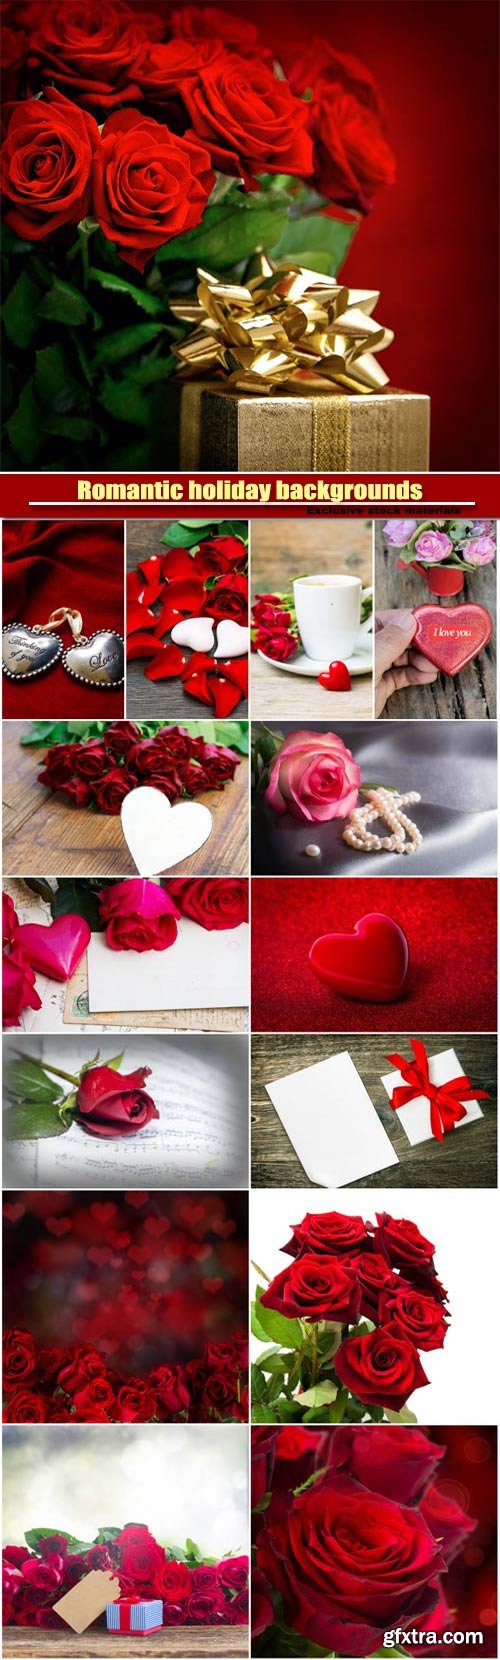 Romantic holiday backgrounds with roses and hearts